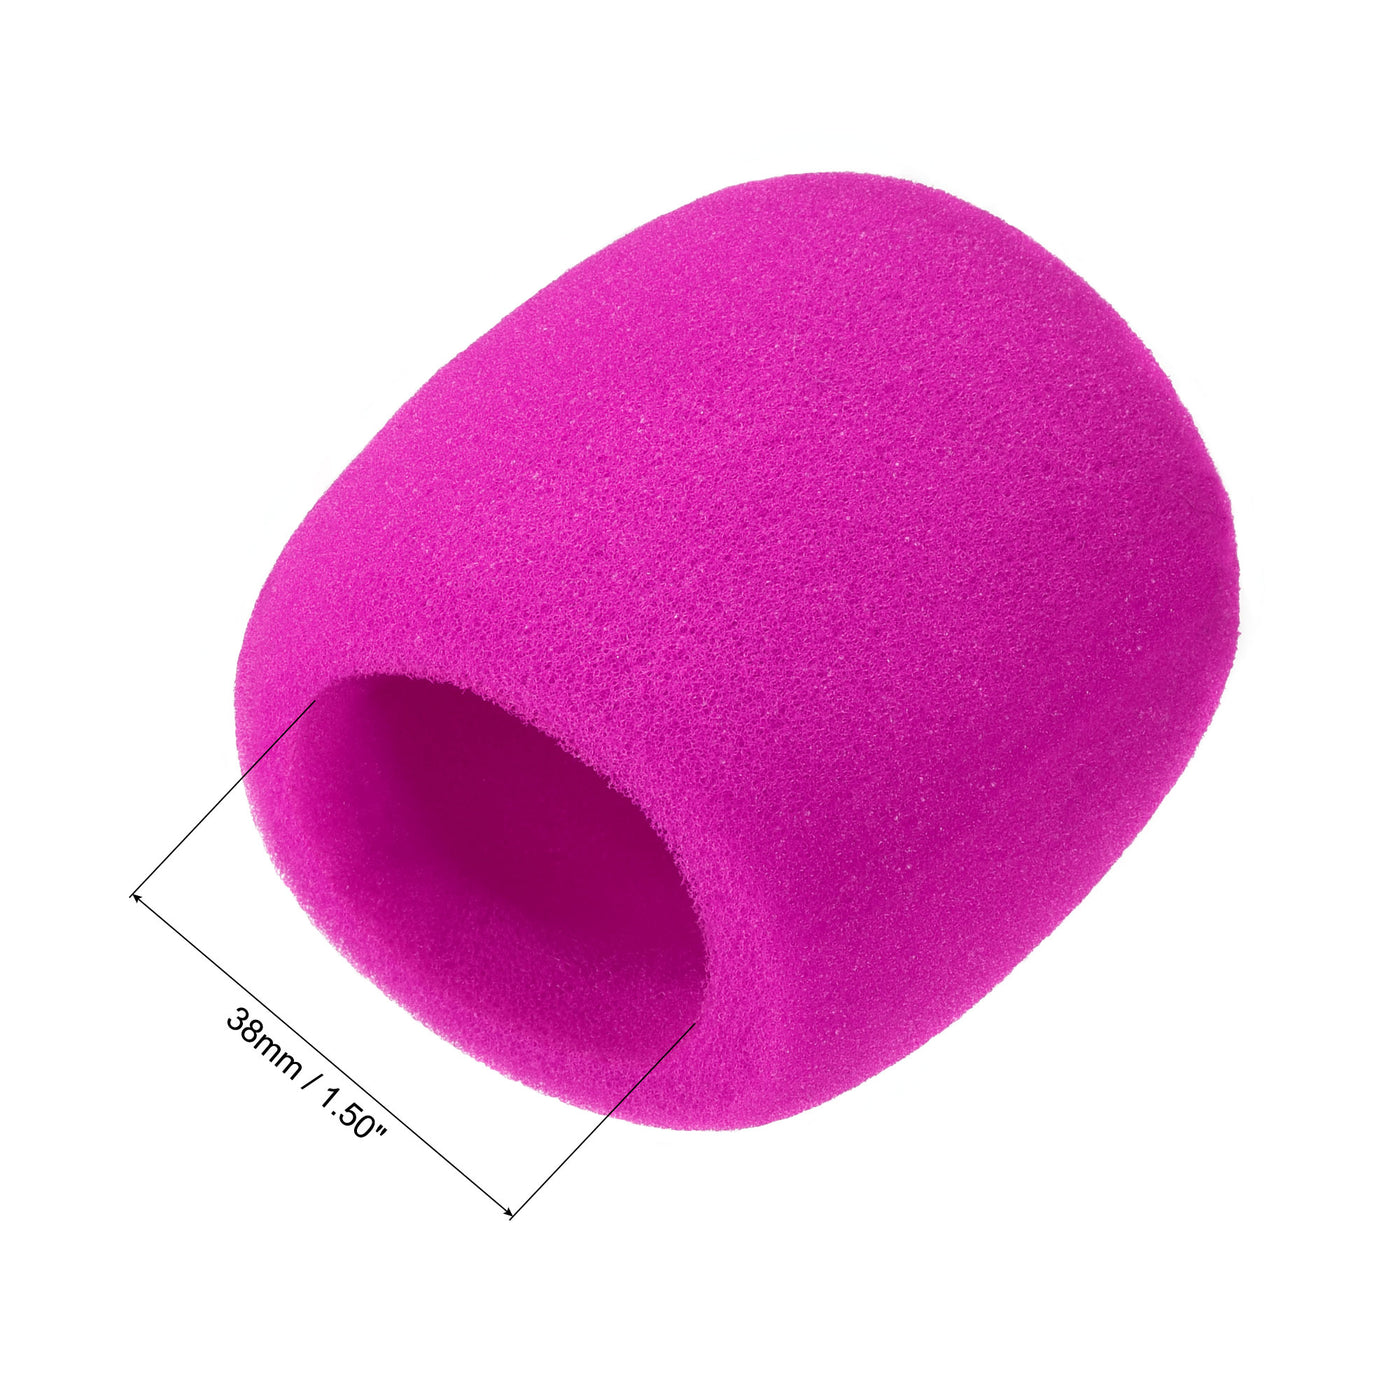 uxcell Uxcell 4Pcs Foam Microphone Covers Ball-Type Thicken for  or 45-55mm Mic Pink